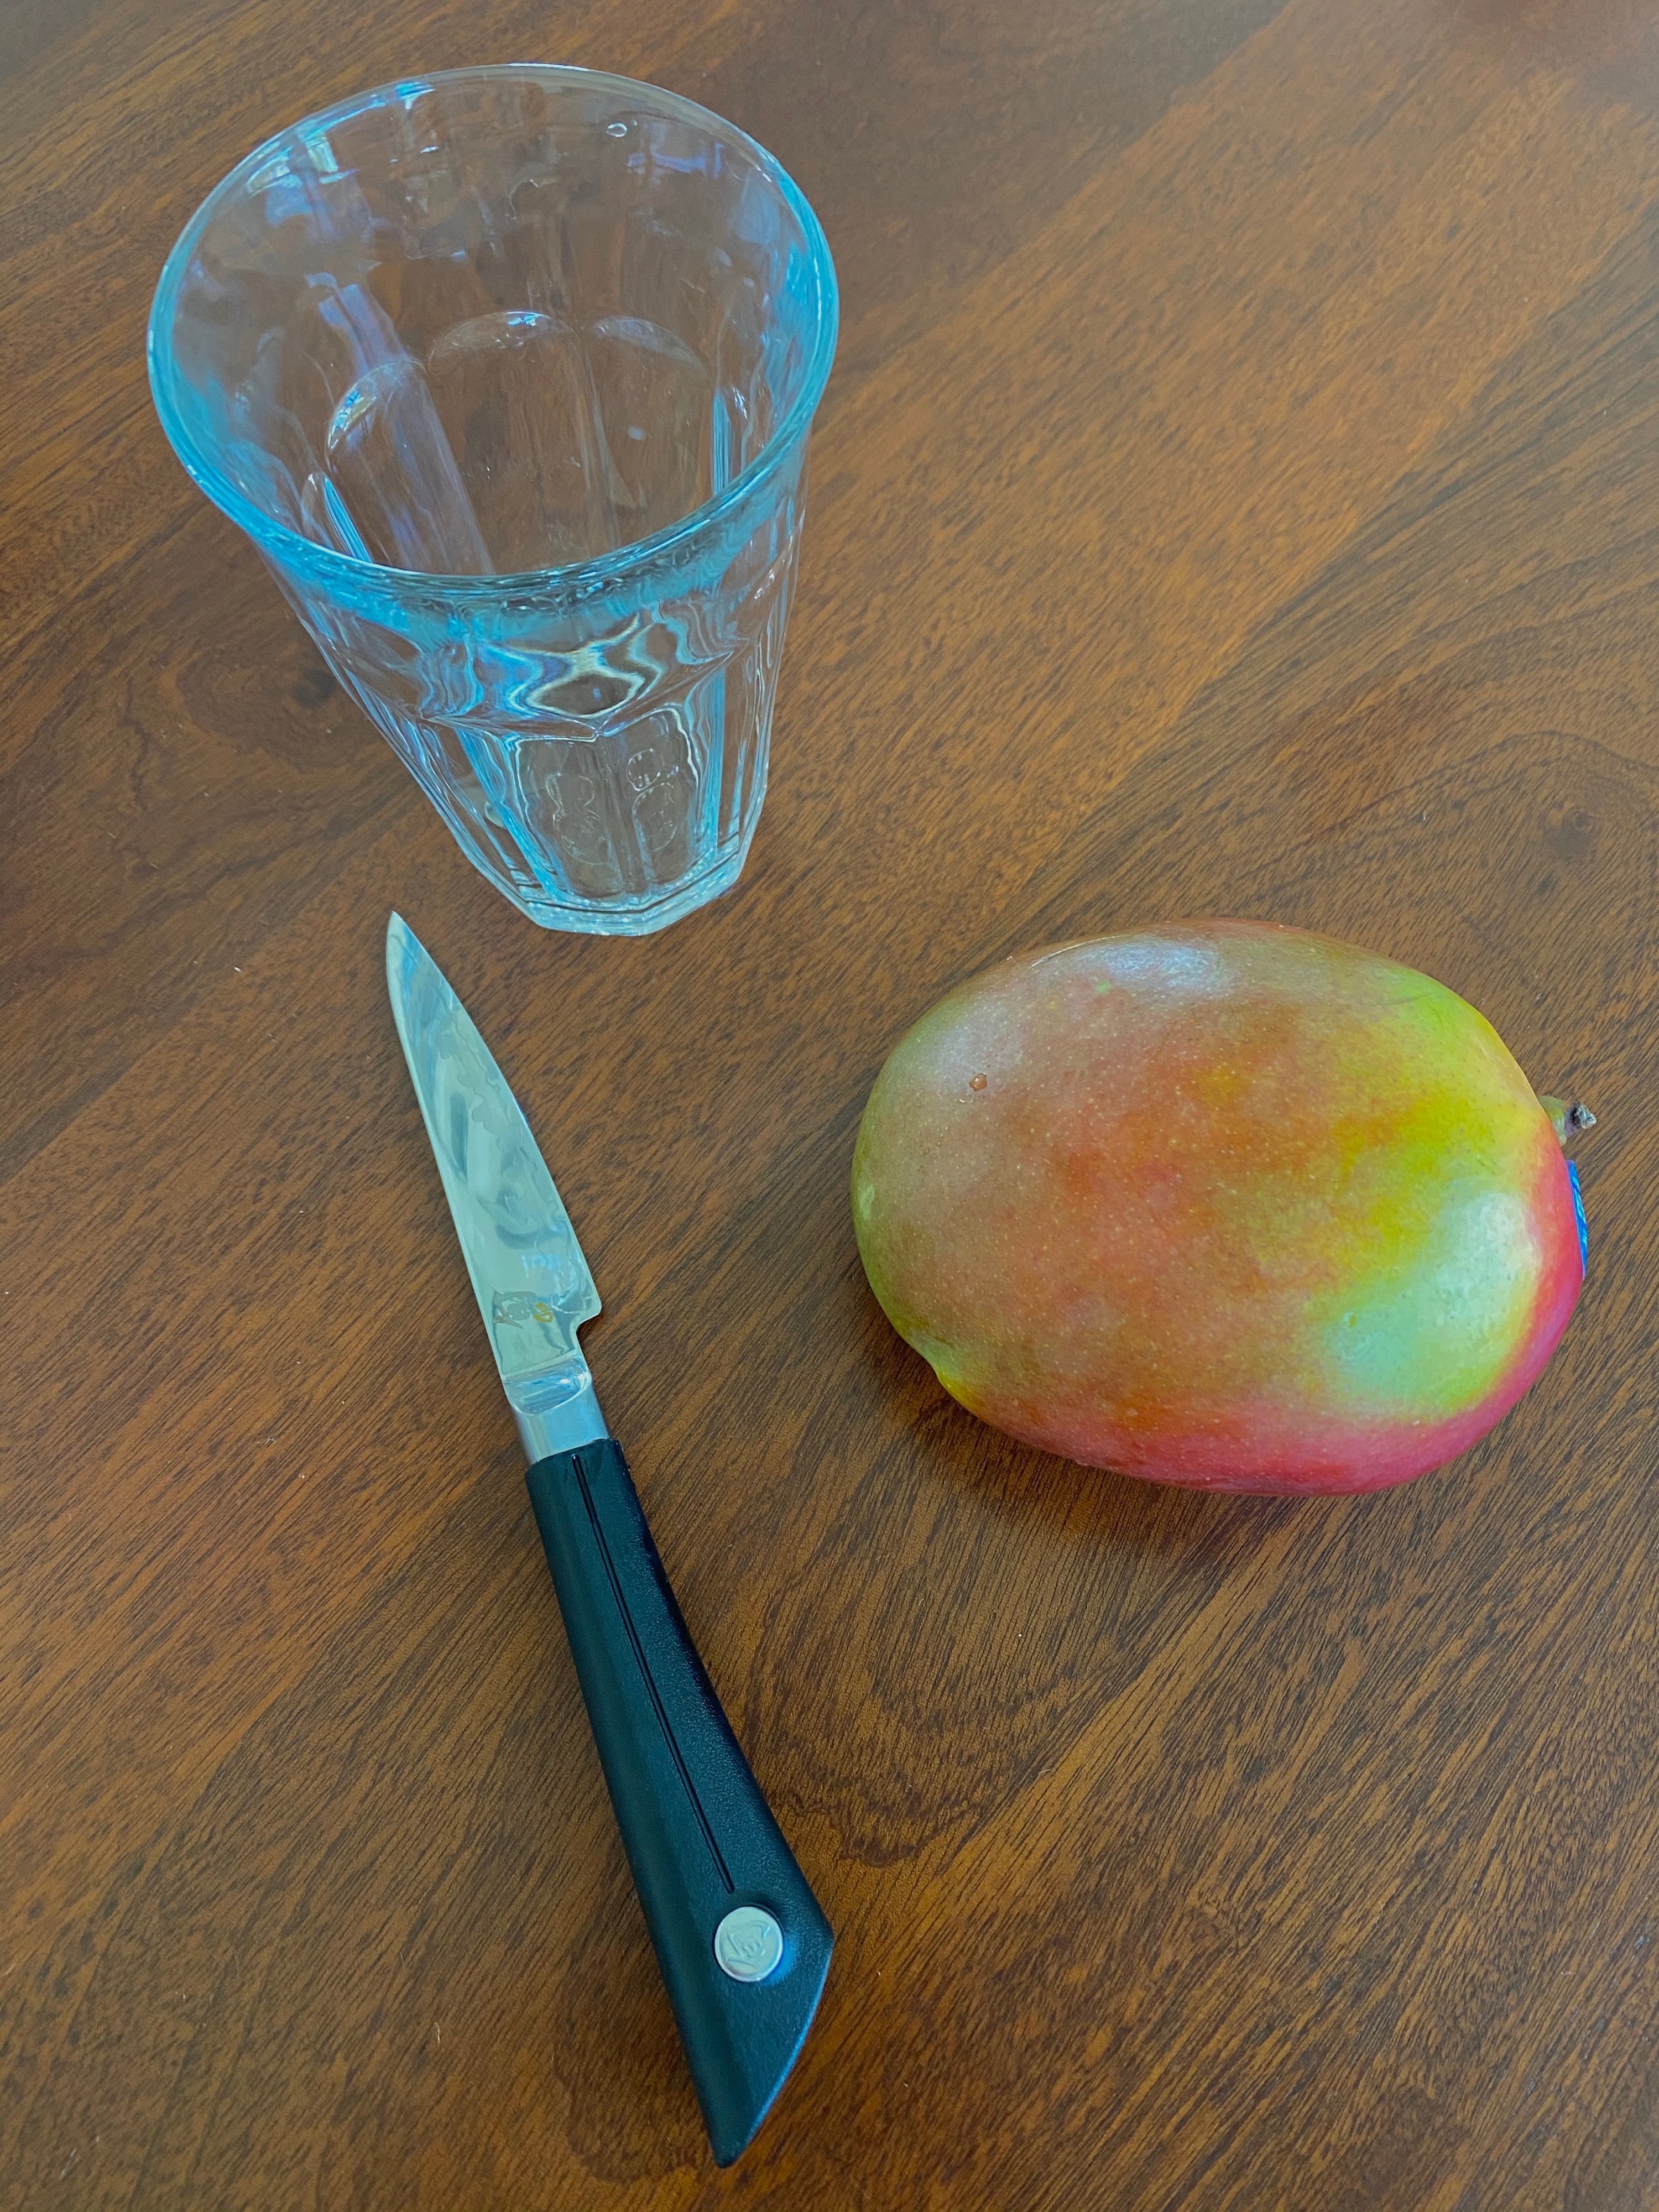 A knife, a whole mango, and a drinking glass on a wooden countertop.